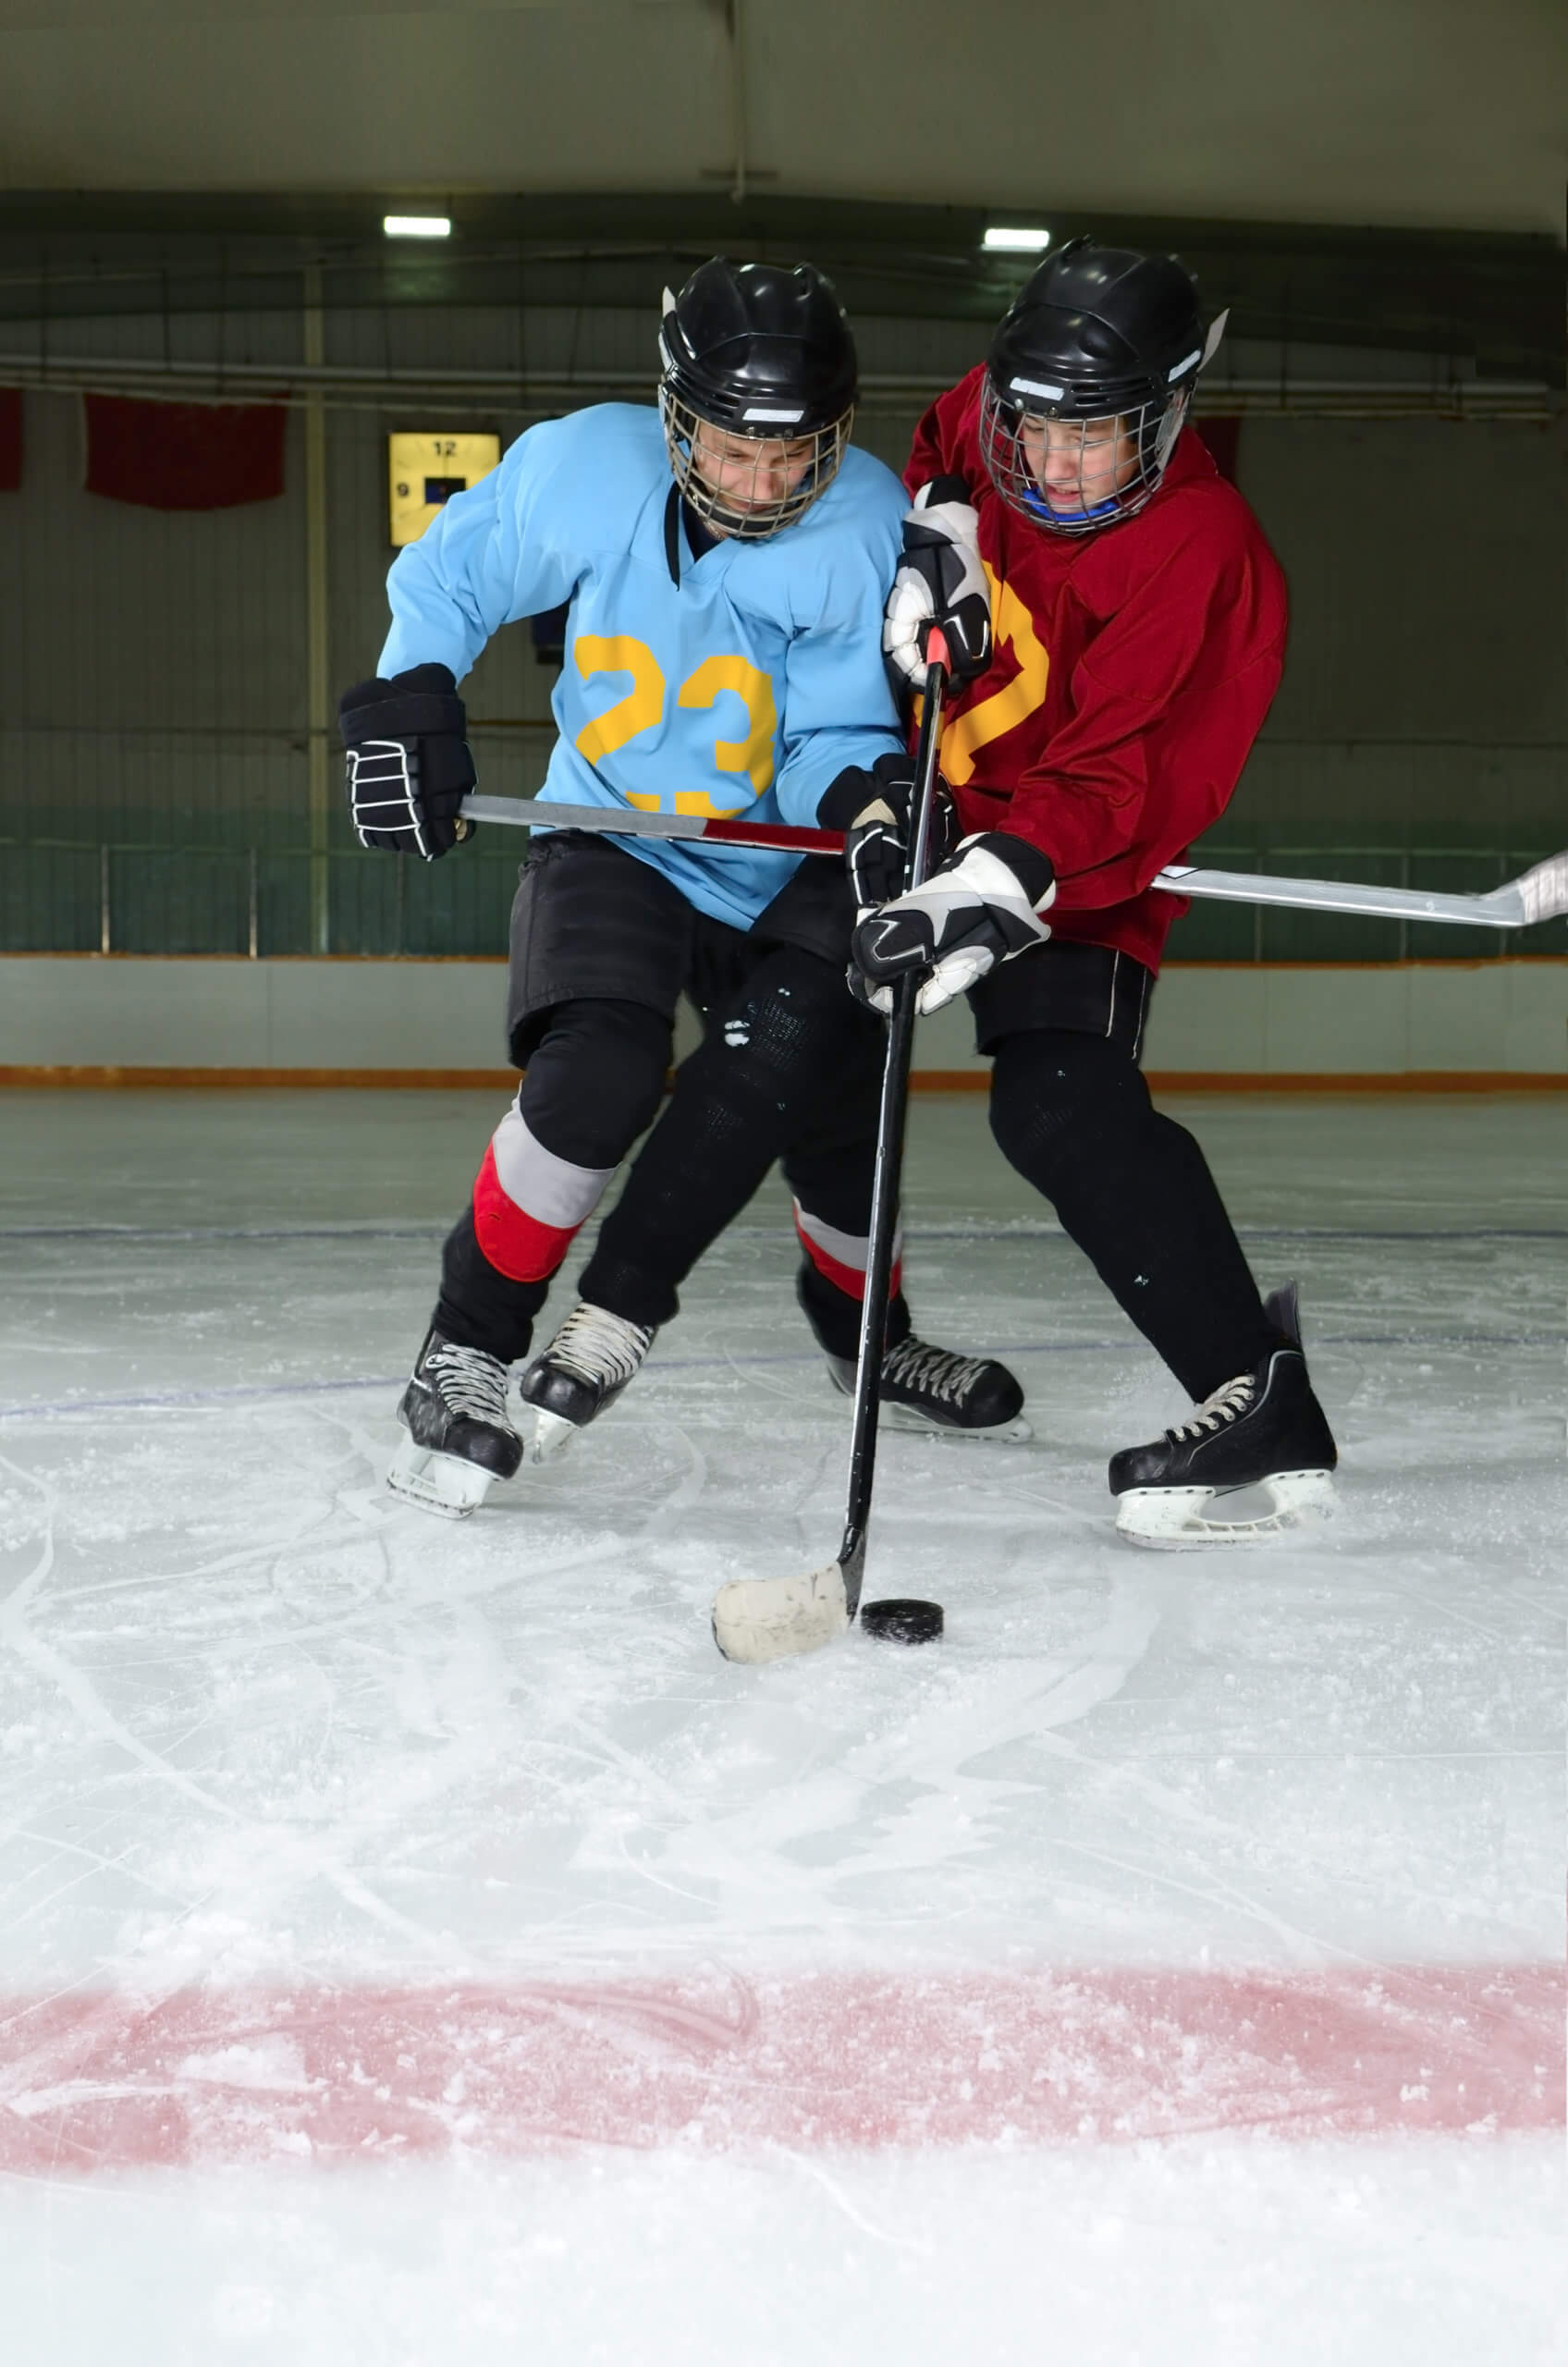 Two teen boys collide shoulder-to-shoulder while playing hockey on an indoor rink. 